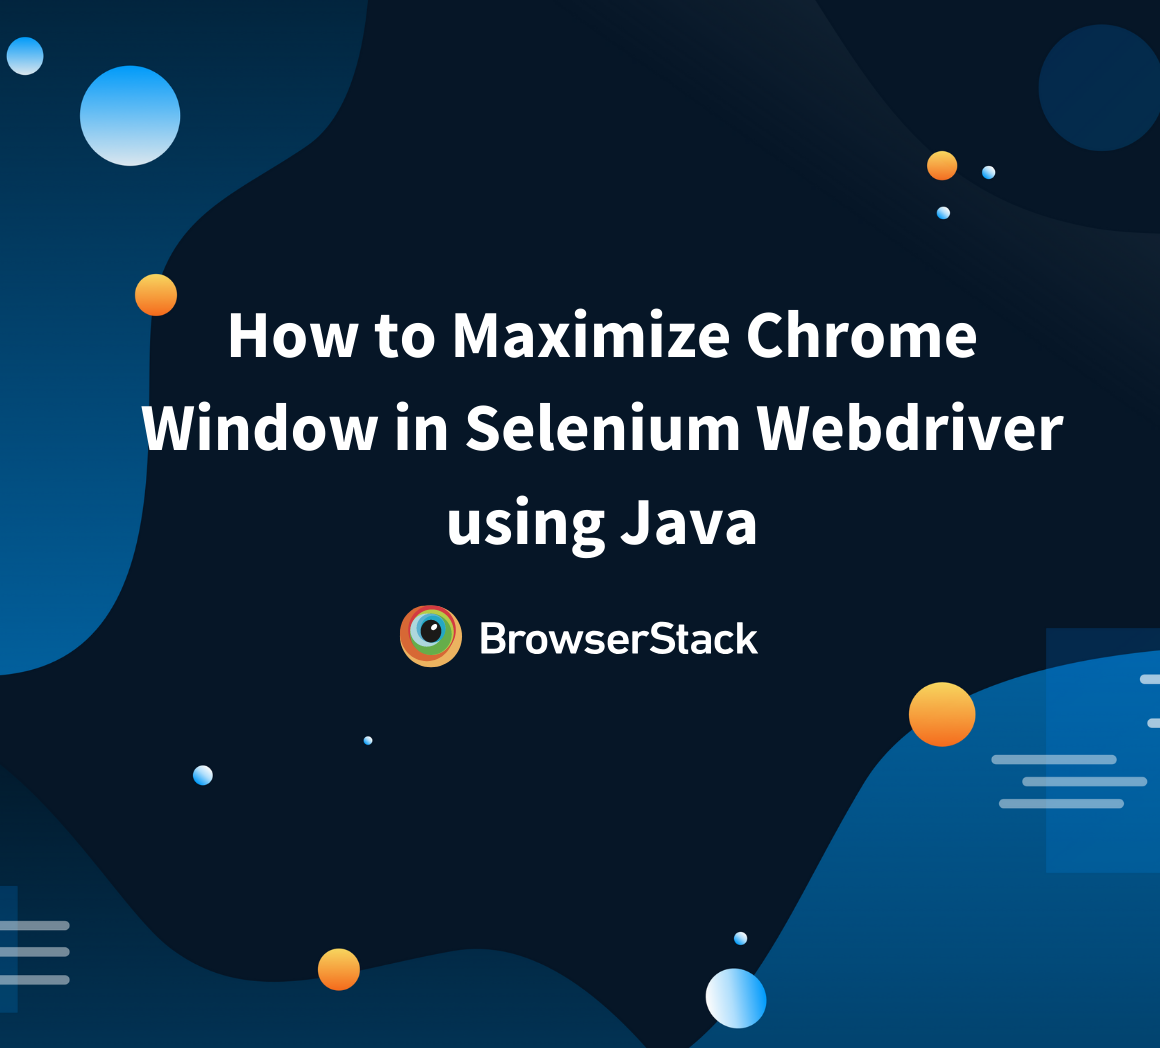 How to Maximize Chrome Window in Selenium Webdriver using Java